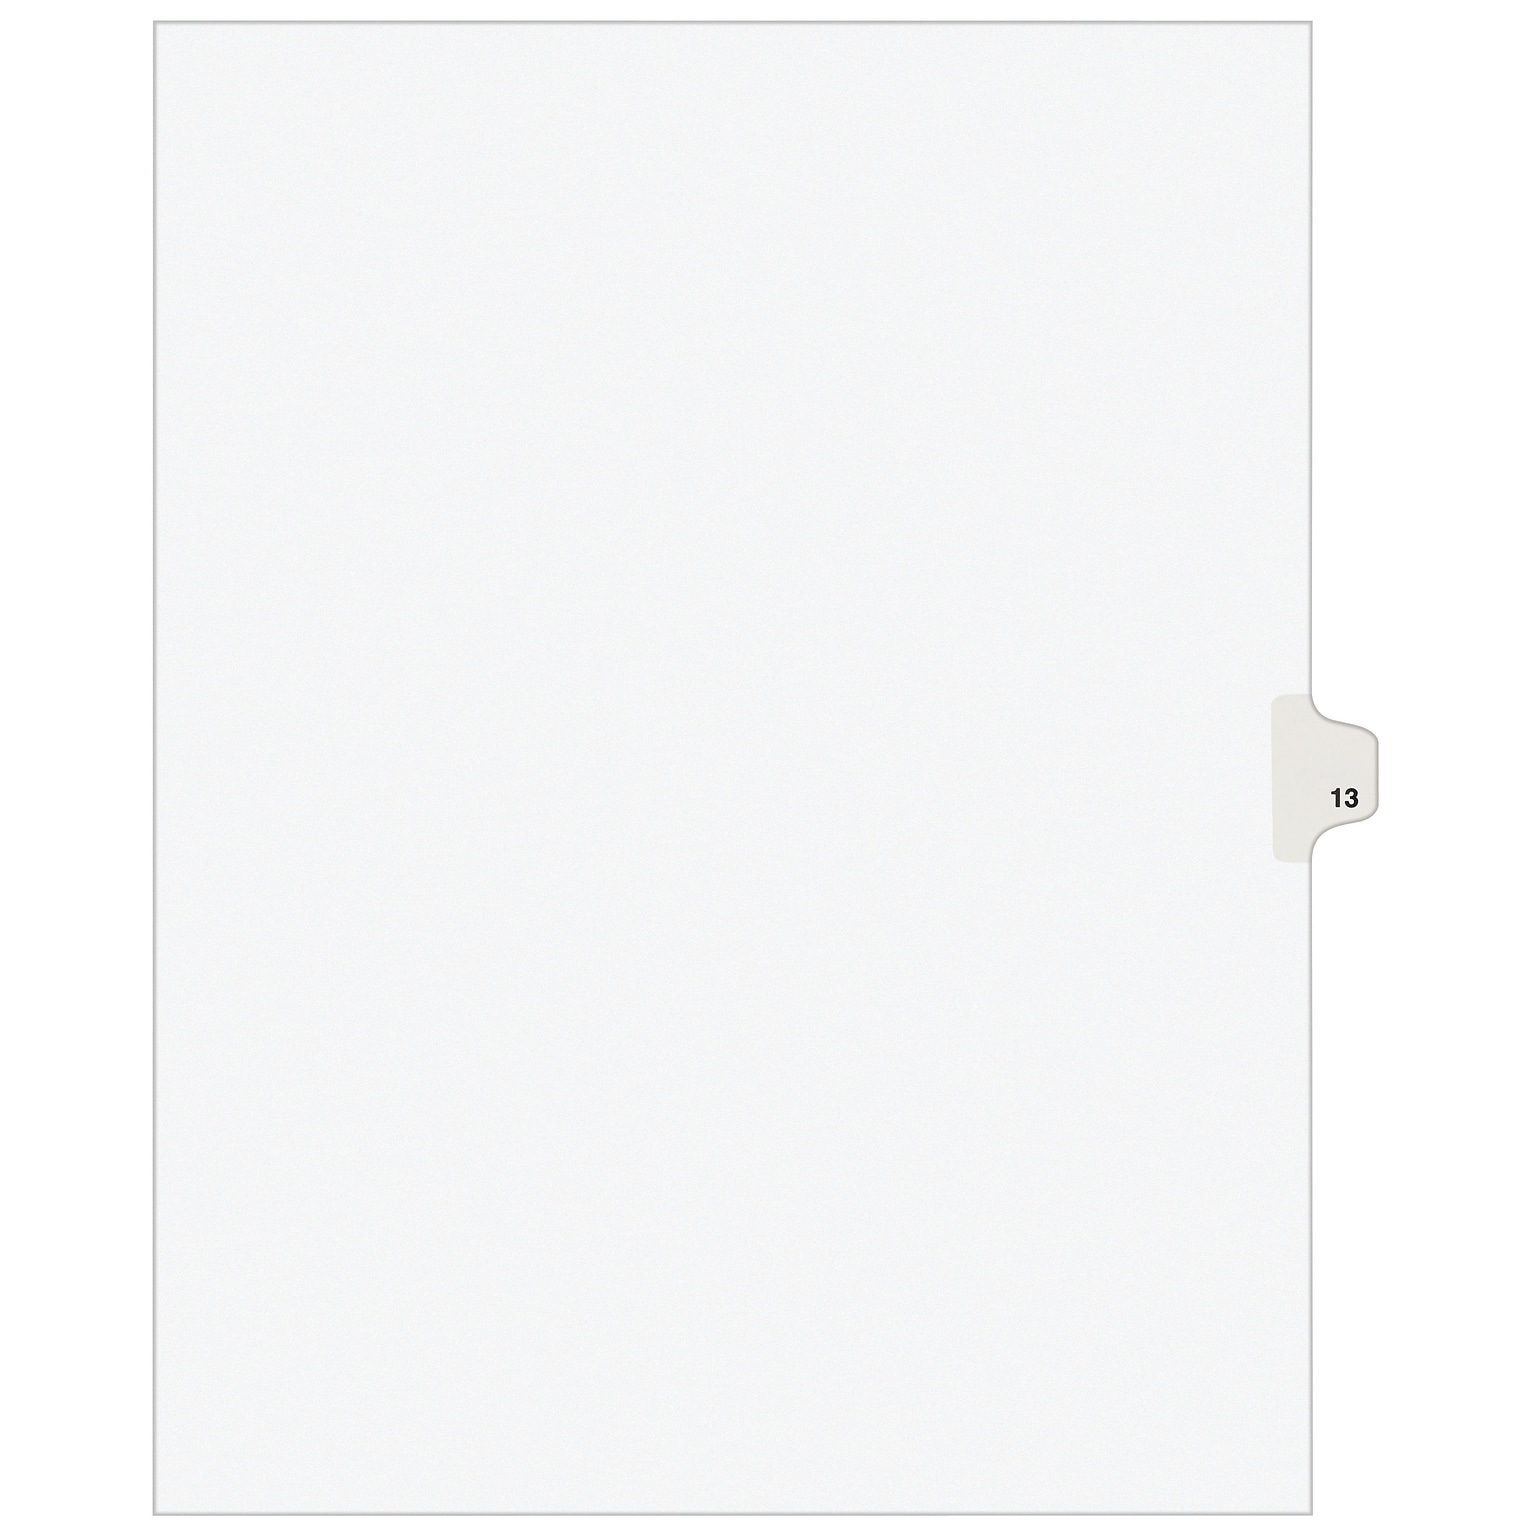 Avery Legal Pre-Printed Paper Dividers, Side Tab #13, White, Avery Style, Letter Size, 25/Pack (11923)